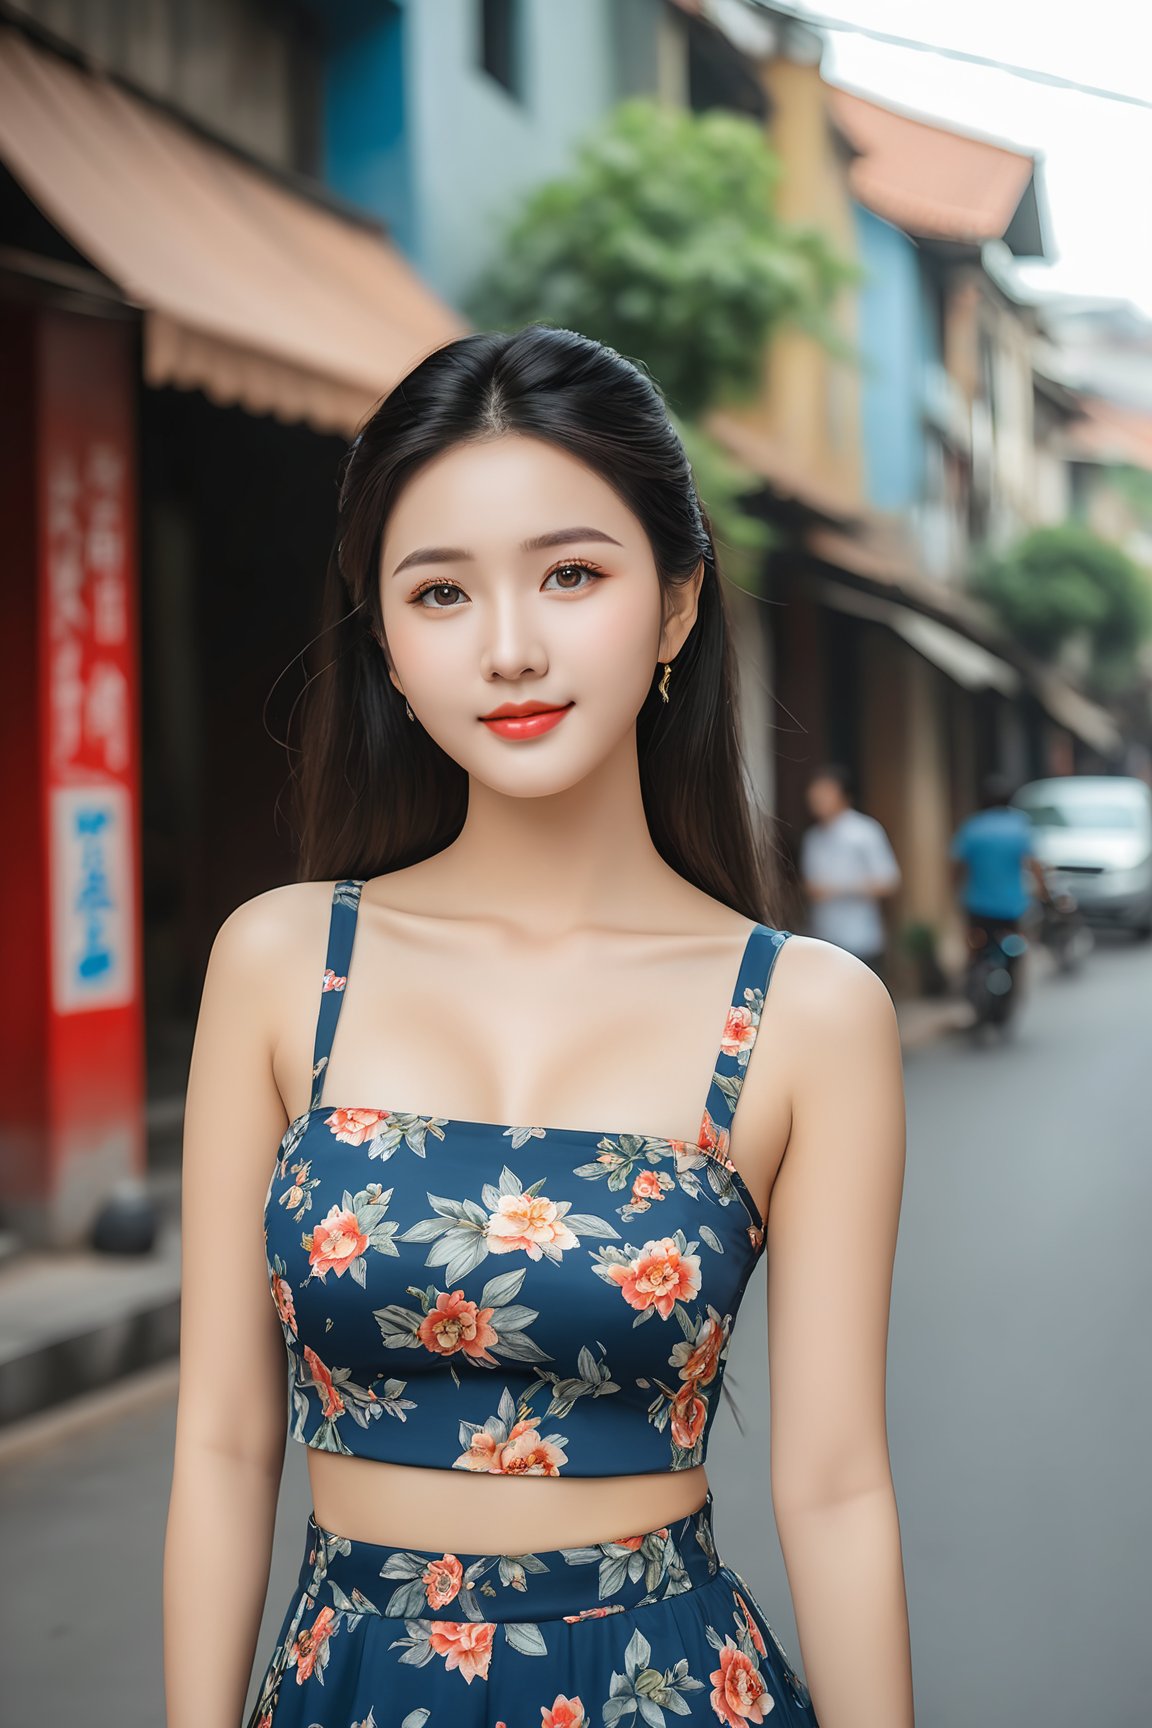 masterpiece,  best quality,  realistic,  photo,  real,  incredibly_absurdres,  Ultra HD, Affectionately looking at you, 8K, UHD, in the vietnamese city street,  full body,  arms behind head, arms behind back,  bust photo, masterpiece,  best quality,  realistic,  photo,  real,  incredibly_absurdres,  Ultra HD, Affectionately looking at you, 8K, UHD, in the vietnamese city street,  full body,  arms behind head, arms behind back,  bust photo, The 20-year-old vietnamese girl, She has black hair,  boho_chic maxi skirt with prints outfit,  The lines of her face are soft and smooth. Her skin is as fair as snow,  soft and delicate,  and her eyes are bright and bright,  deep and mysterious,  making people feel endless charm and appeal. The eyebrows are slender and graceful,  the nose is straight and noble,  the lips are rosy and seductive,  and the slightly raised angle reveals confidence and elegance. Her facial features are delicate and three-dimensional,  with well-defined contours,  like a fine painting or a finely carved work of art. The overall feeling is gentle,  elegant,  noble and full of charm,  huge_filesize,  bust,  girl,  kawaii,  adorable girl,  bishoujo,  ojousama,  idol,  wavy hair,  long hair,  black hair,  beautiful detailed eyes,  looking at viewer,  seductive smile,  black eyes,  large breasts,  arms behind back